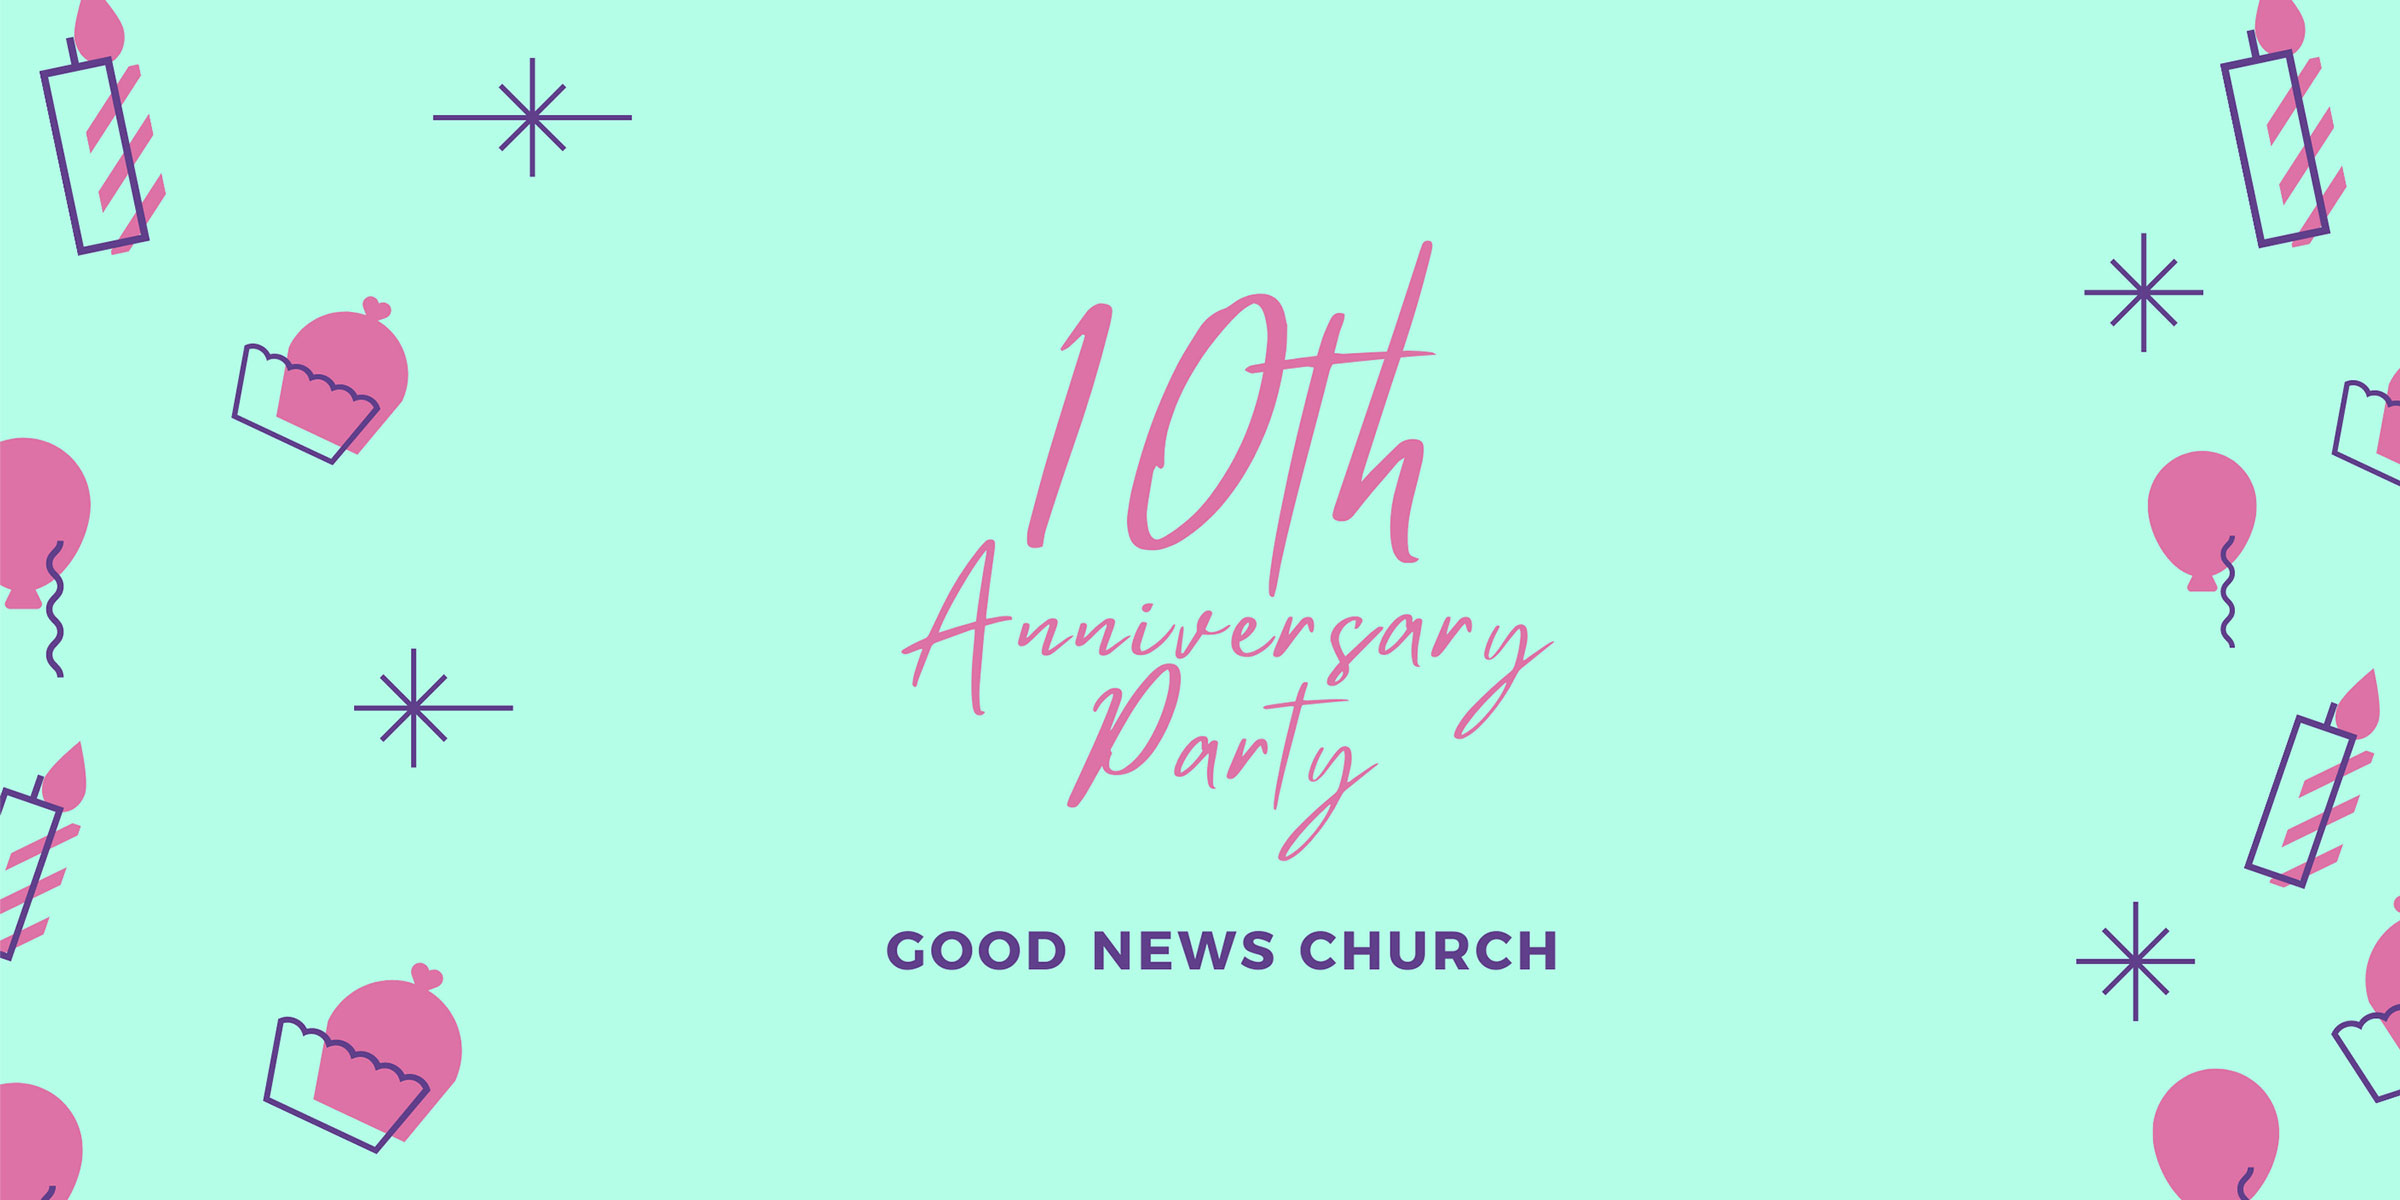 Can you believe it? Good News Church is almost 10 years old!